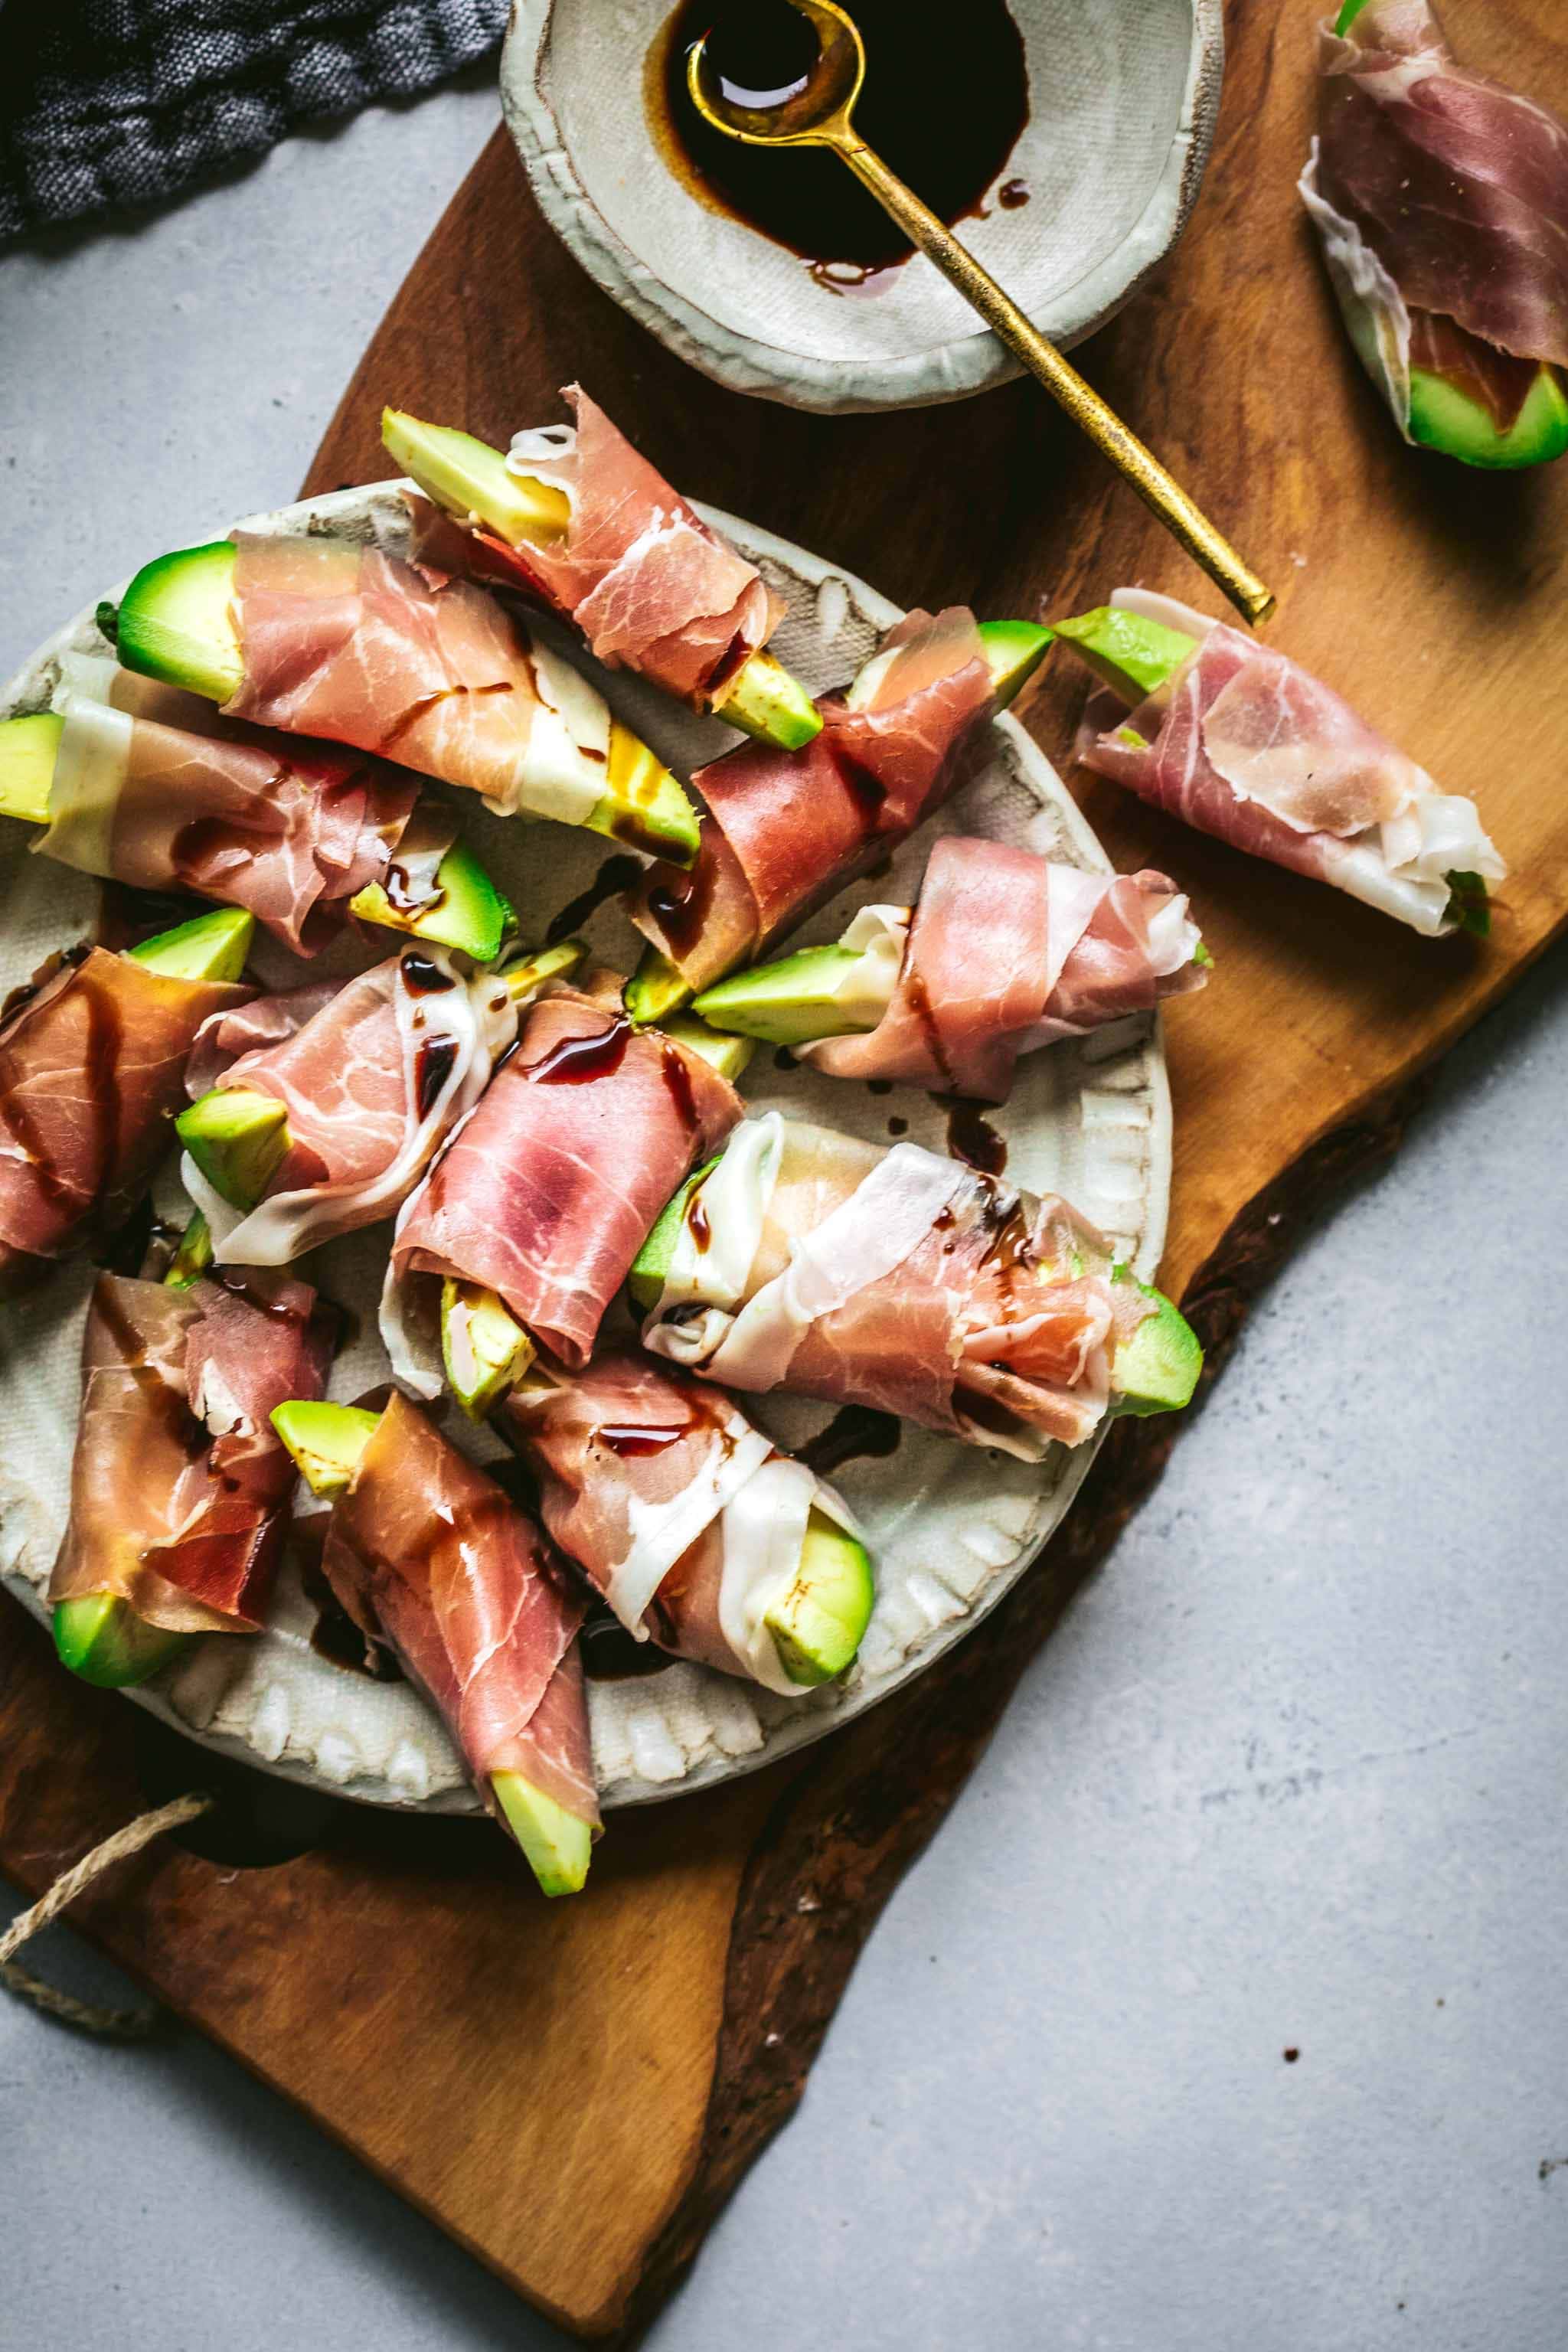 Avocado bites wrapped in prosciutto on wood cutting board.